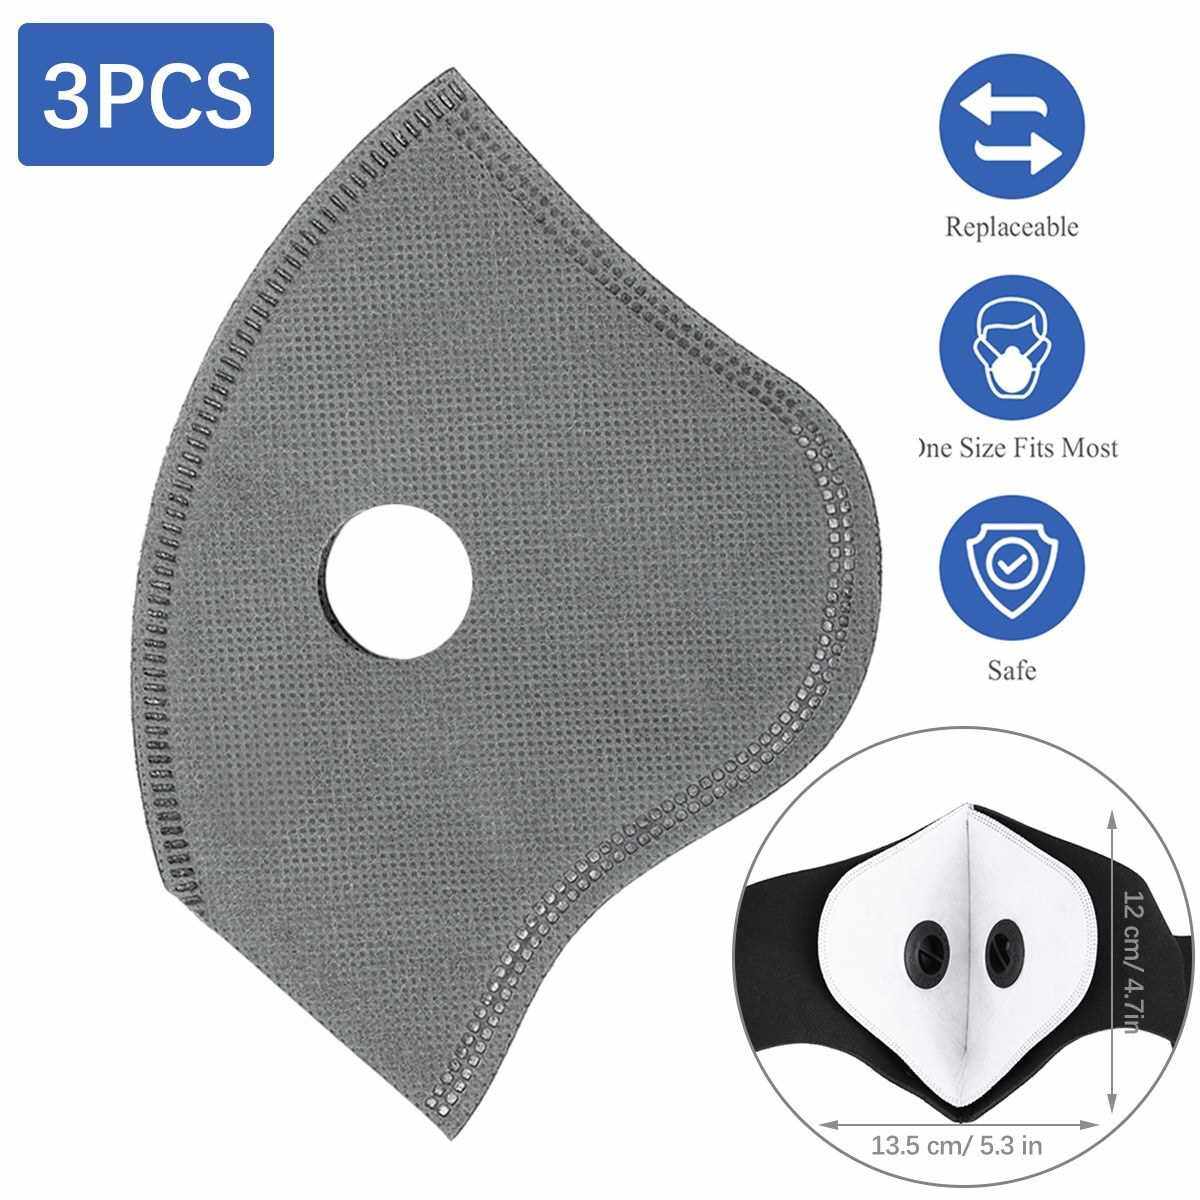 3Pcs Mouth Cover Filters PM2.5 Activated Carbon Filter Pad Replaceable Fog-proof Haze-proof Dustproof 6-Layer Protective Pad (Silver)